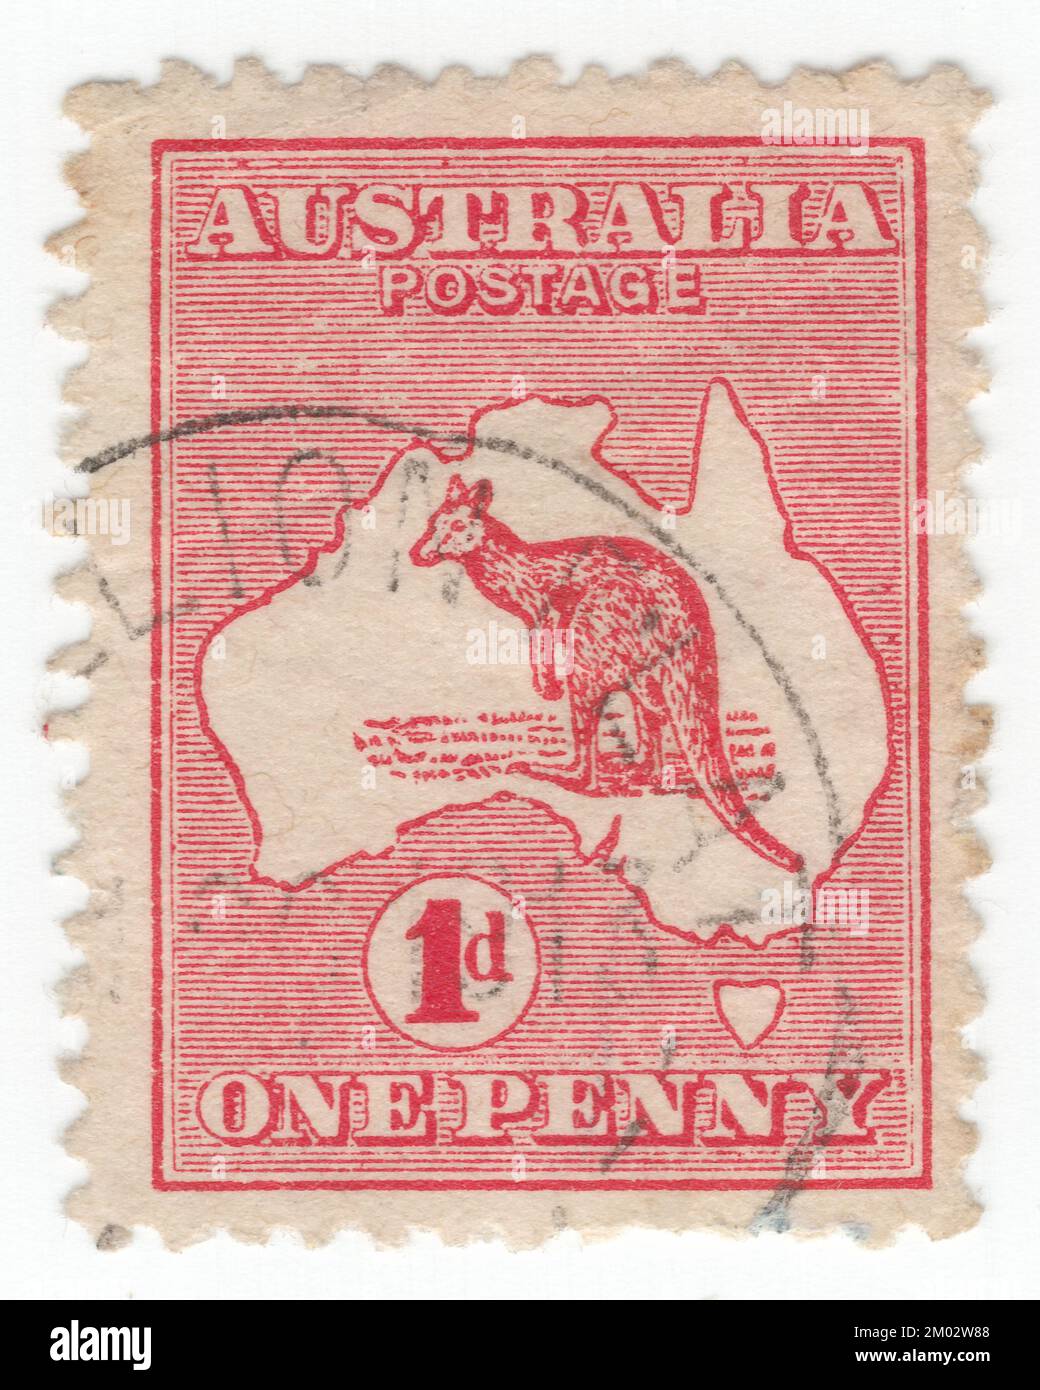 AUSTRALIA — 1913: An 1 pence carmine postage stamp depicting Kangaroo and Map of Australia. Australia is the oldest, flattest, and driest inhabited continent, with the least fertile soils. It is a megadiverse country, and its size gives it a wide variety of landscapes and climates, with deserts in the centre, tropical rainforests in the north-east, and mountain ranges in the south-east. The kangaroo is a recognizable symbol of Australia. First Australian postage stamps issue. The kangaroo and emu feature on the Australian coat of arms Stock Photo